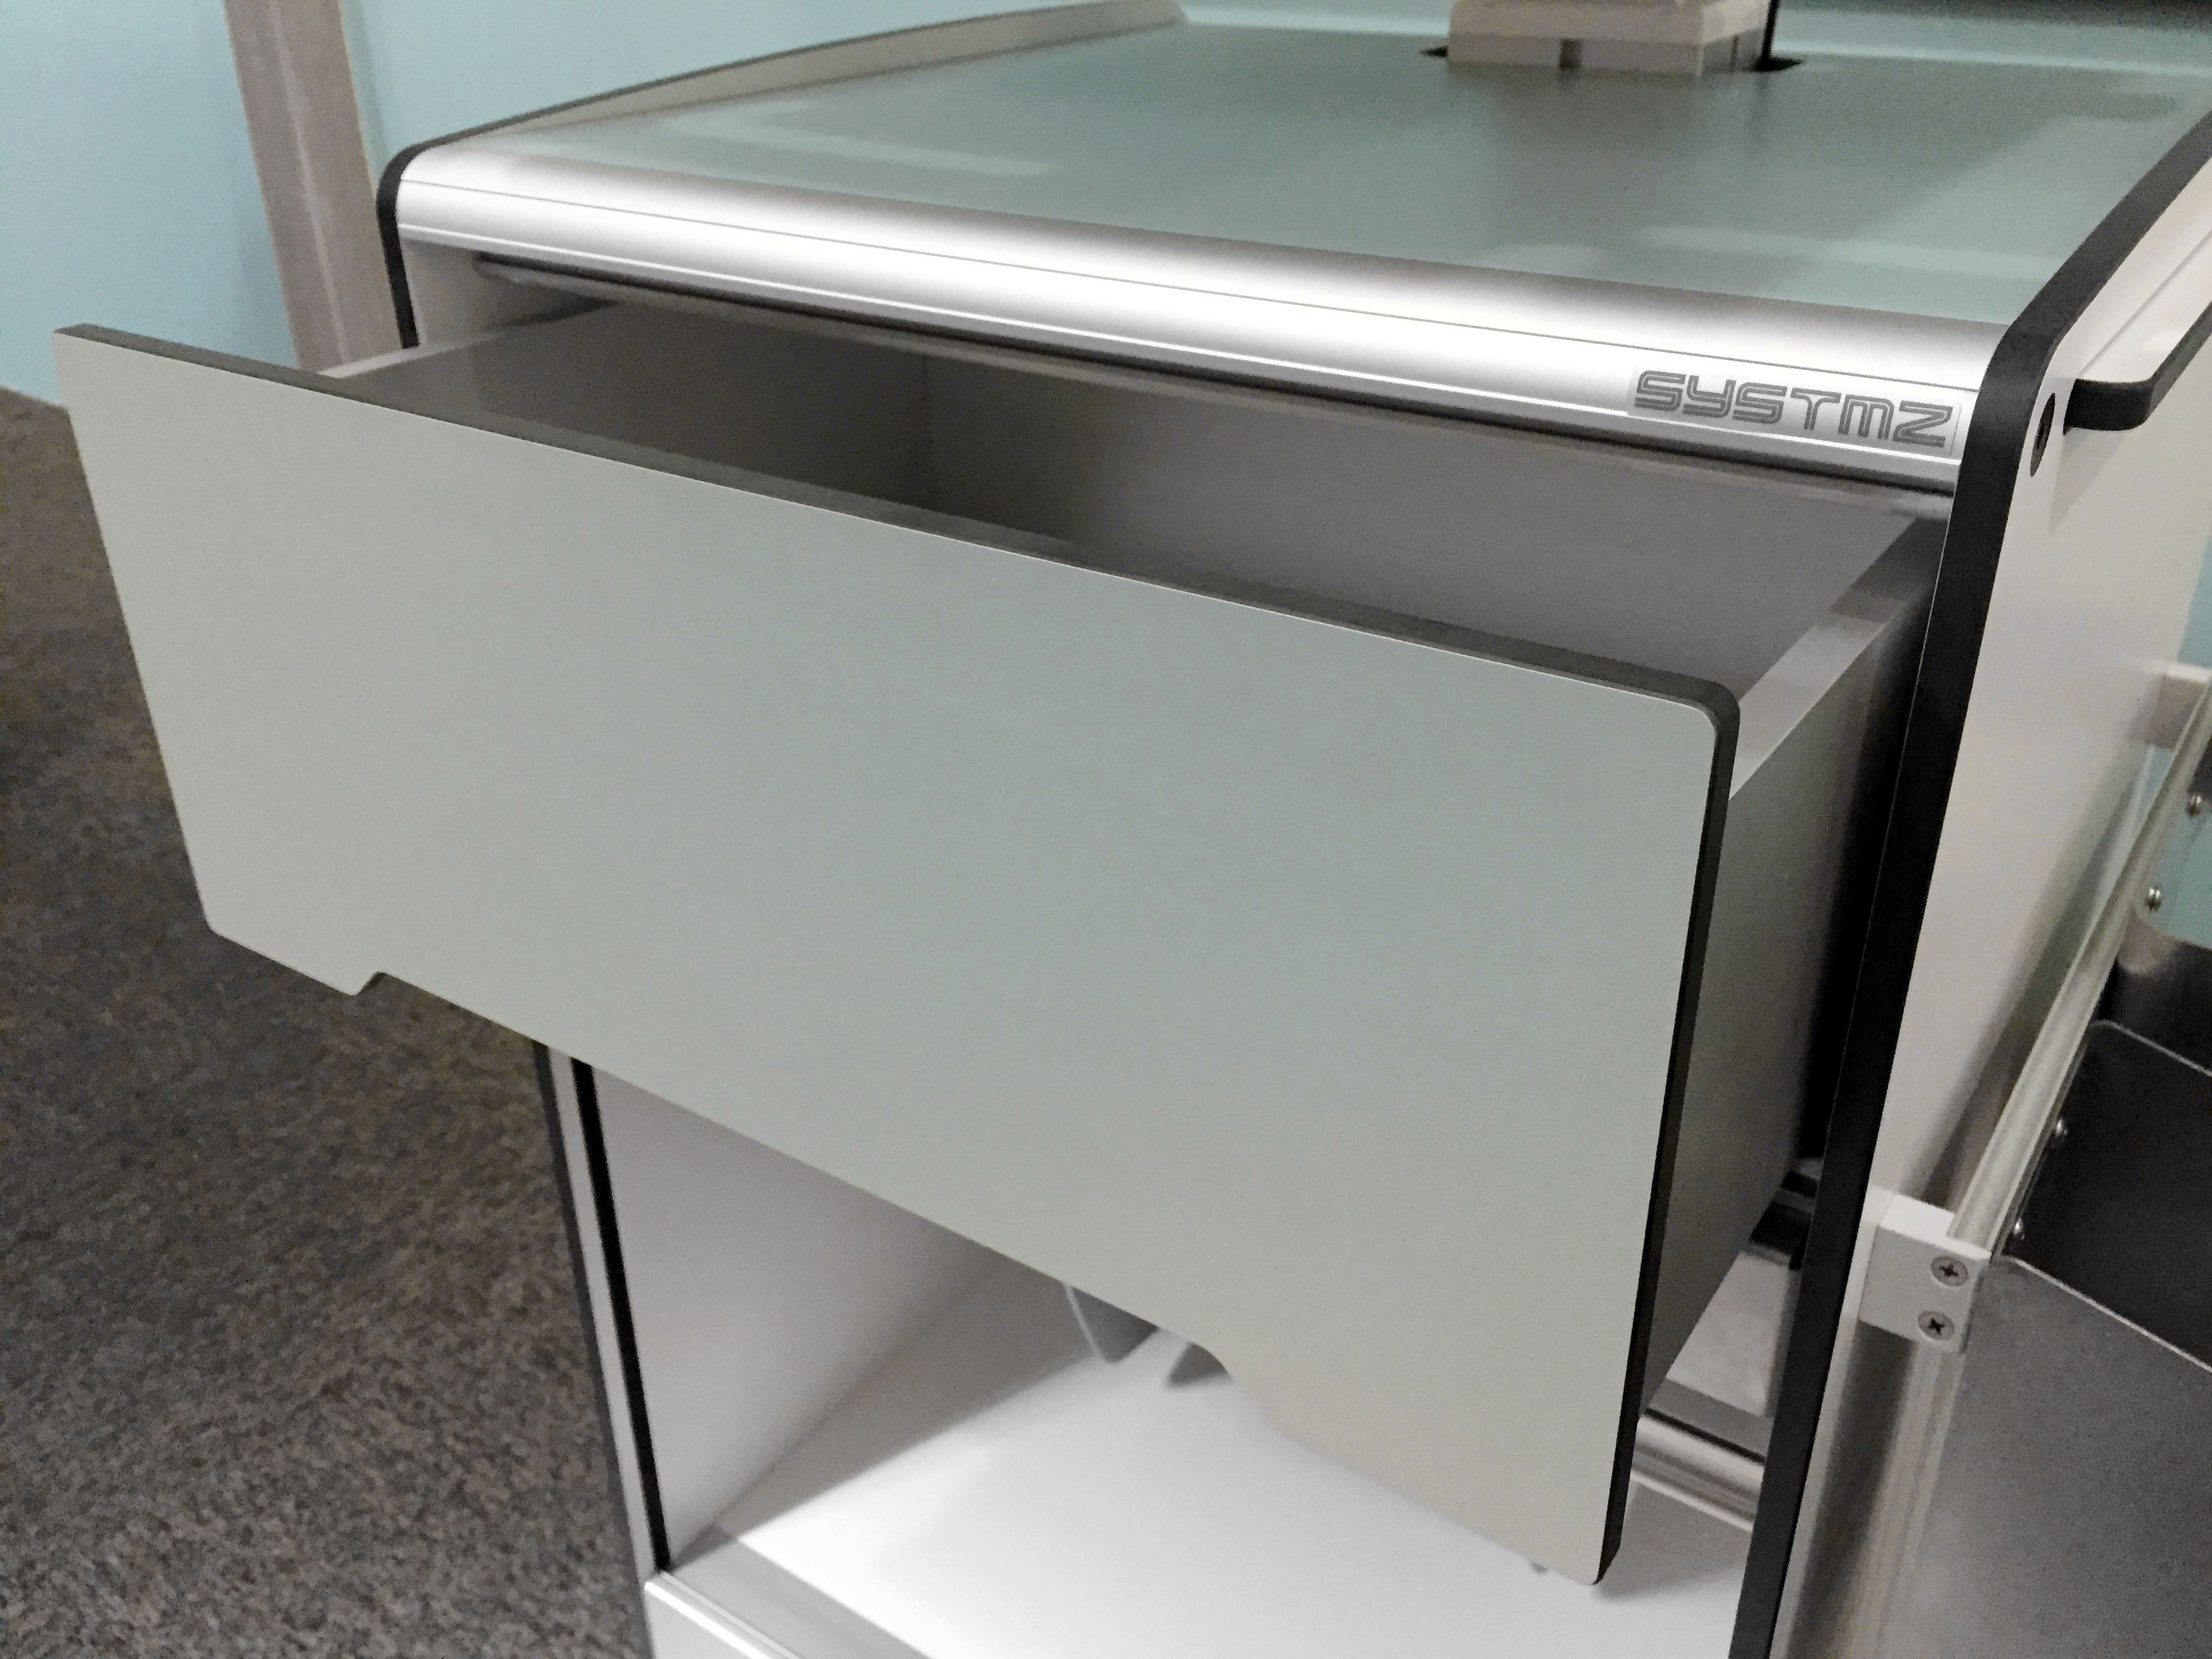 aluminium profile chasis with soft closing drawers made with anti-microbial phenolic material